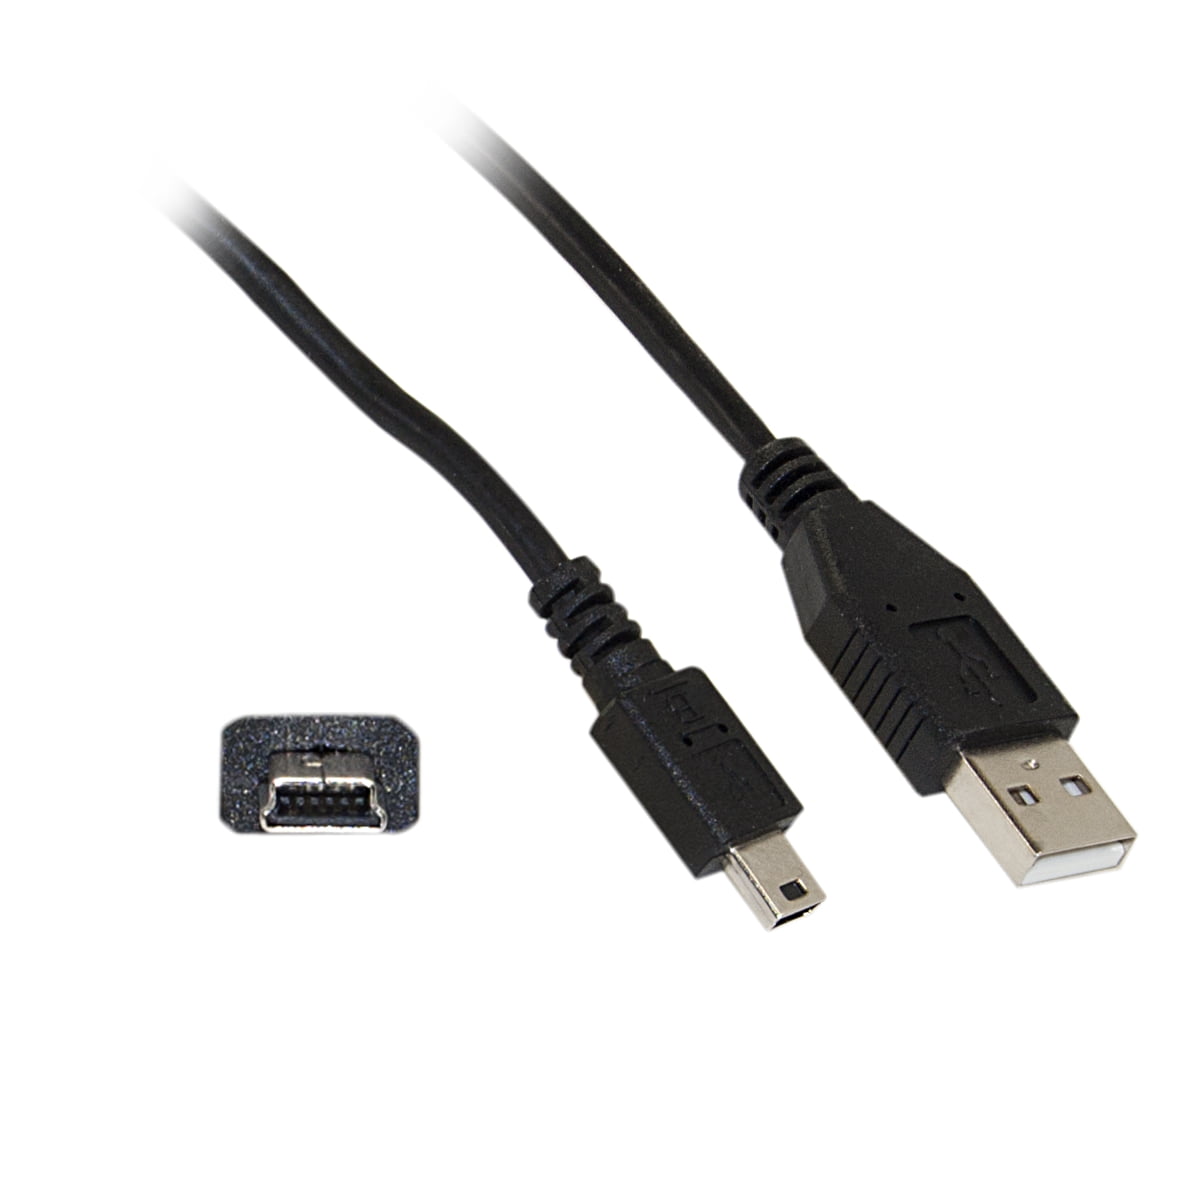 Cables 20pcs New USB 2.0 A Female to Mini USB B 5 Pin Male Adapter Cable Length: Other, Color: Black Occus 